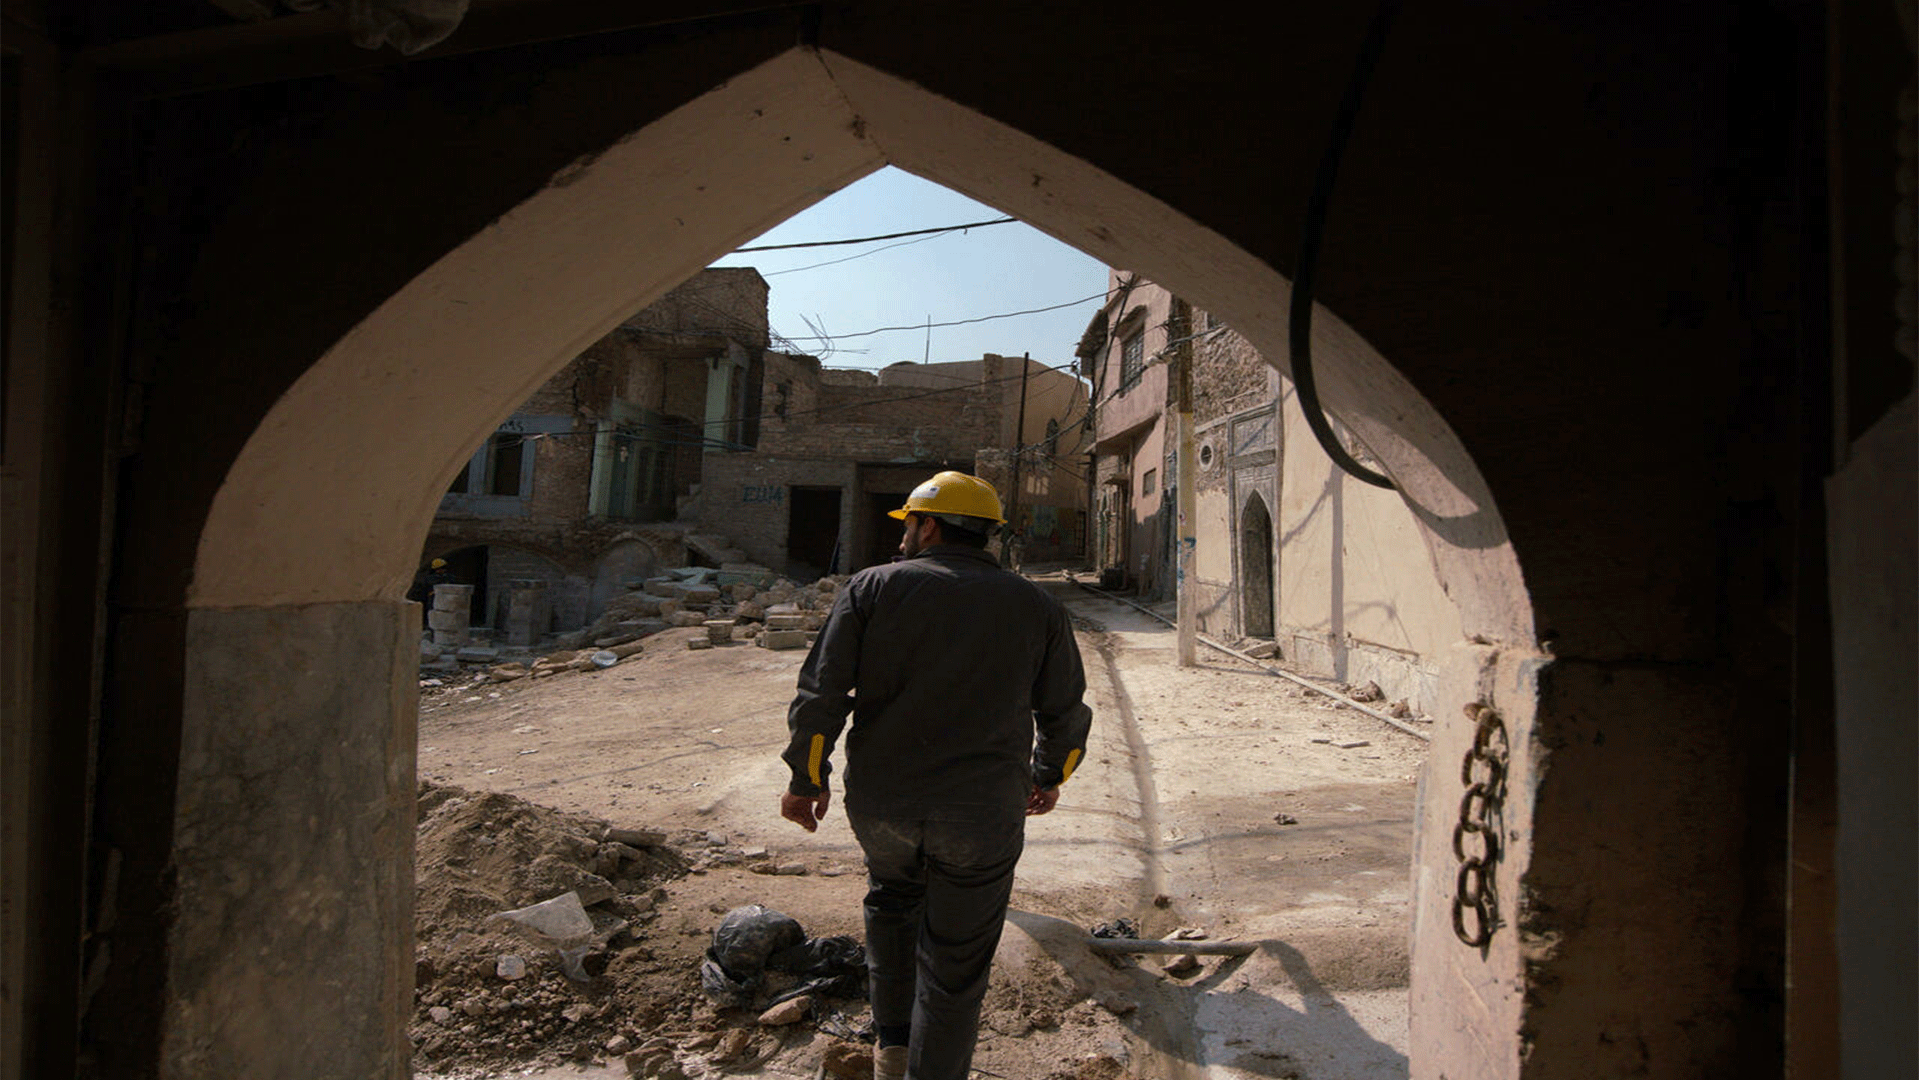  An Iraqi architect exits a traditional house during renovations in the Old Town of Mosul, which was reduced to rubble during fighting to expel jihadists Zaid AL-OBEIDI AFP